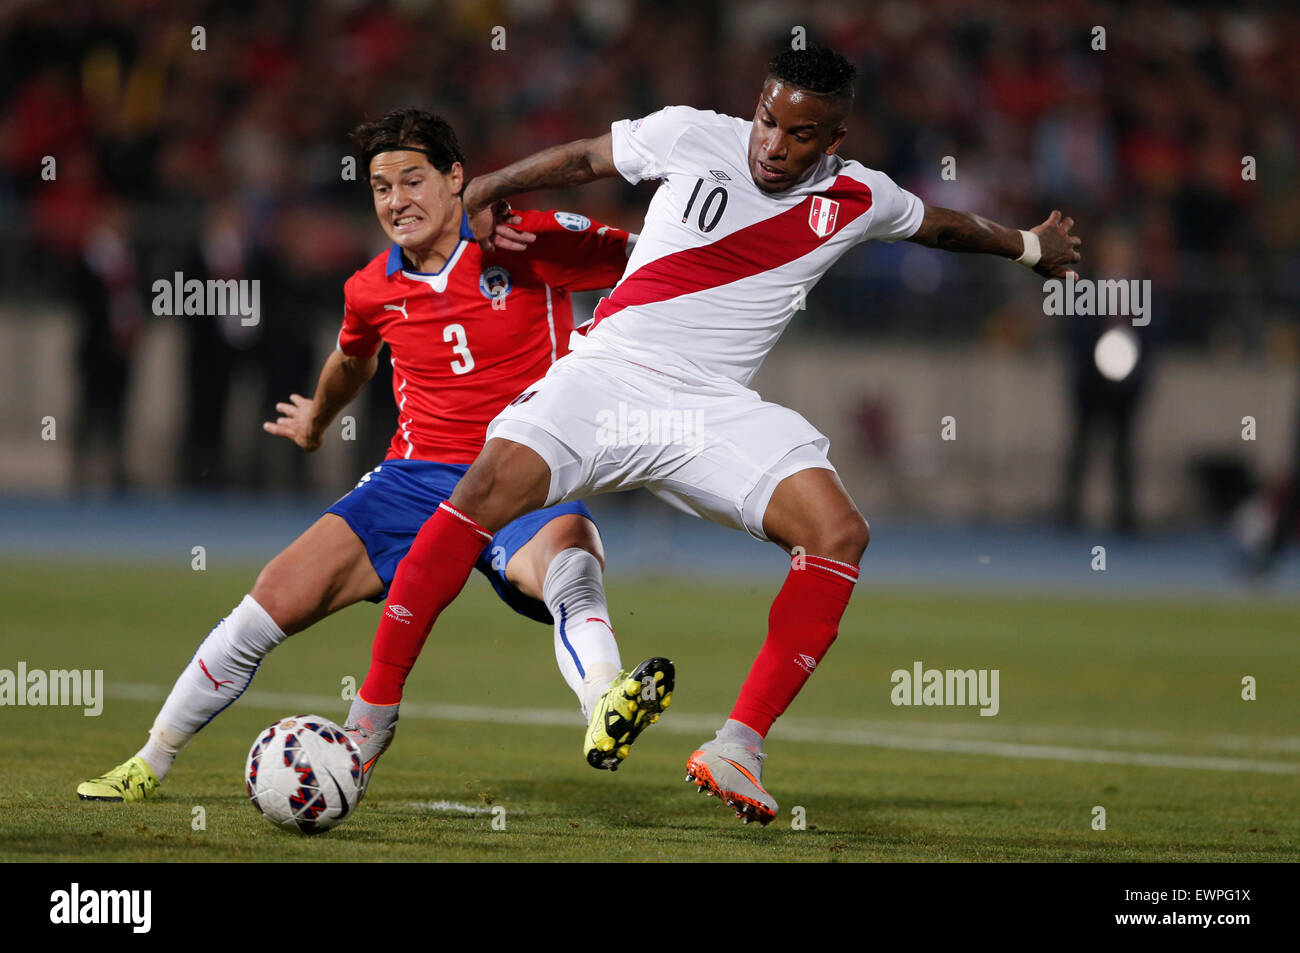 Santiago, Chile. 29th June, 2015. Miiko Albornoz (L) from Chile vies for the ball with Jefferson Farfan (R) from Peru during the Copa America Chile 2015 semifinal match, held at National Stadium, in Santiago, Chile, on June 29, 2015. Chile won 2-1 Credit:  Guillermo Arias/Xinhua/Alamy Live News Stock Photo